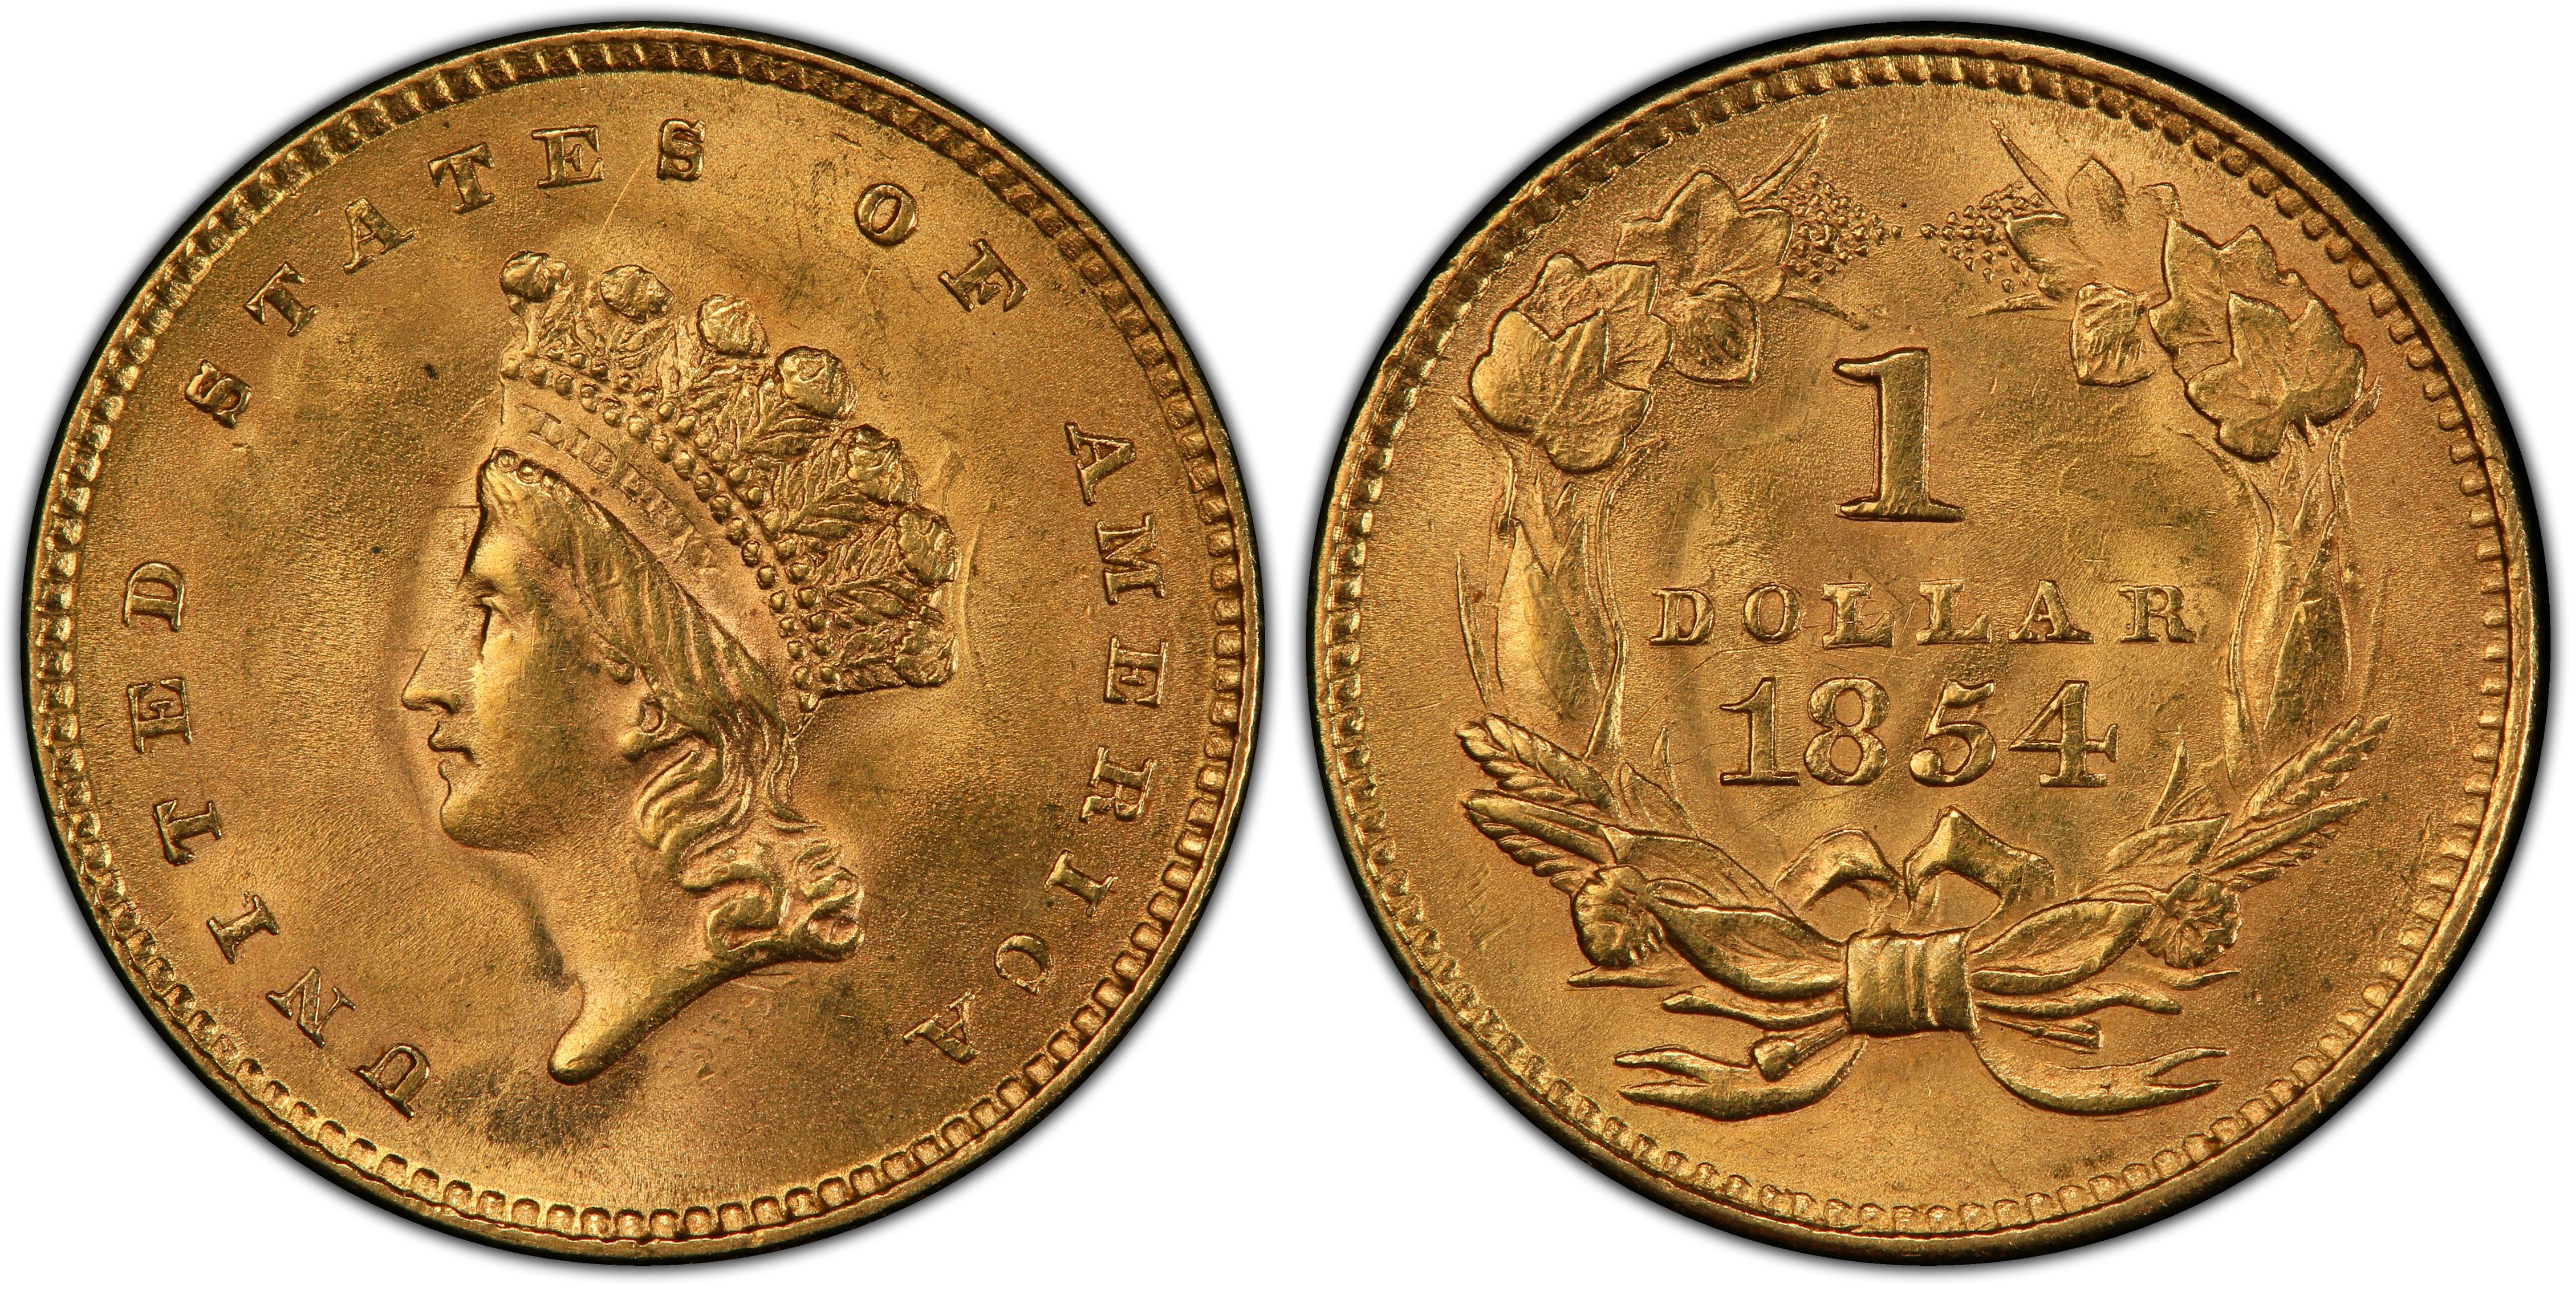 Images of Gold Dollar 1854 G$1 Type 2 - PCGS CoinFacts